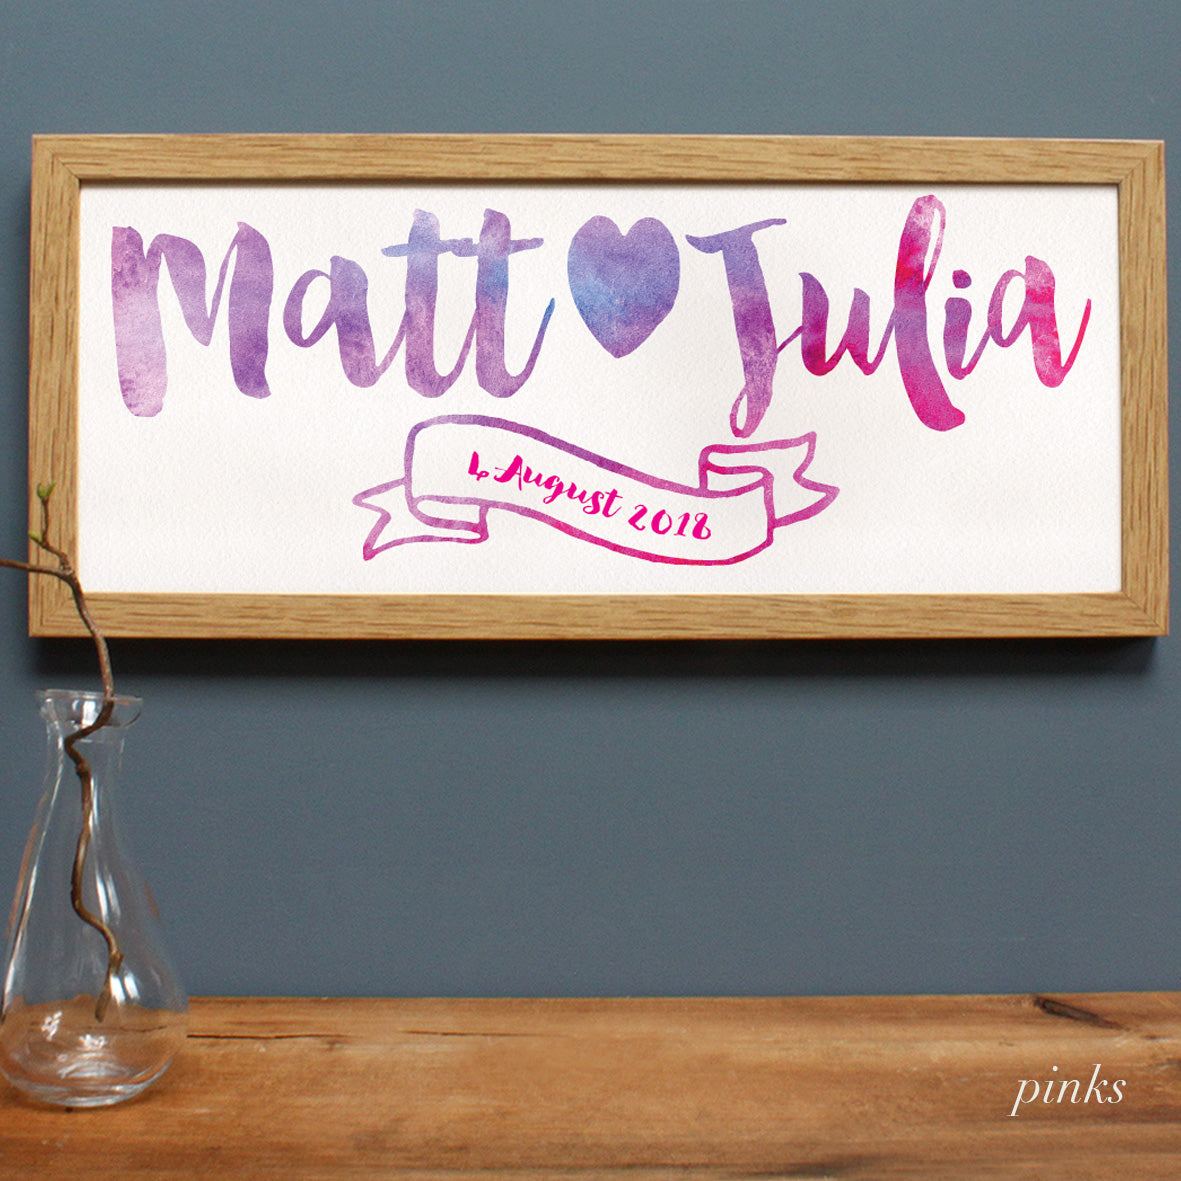 pinks lettering in an oak frame for a unique wedding gift